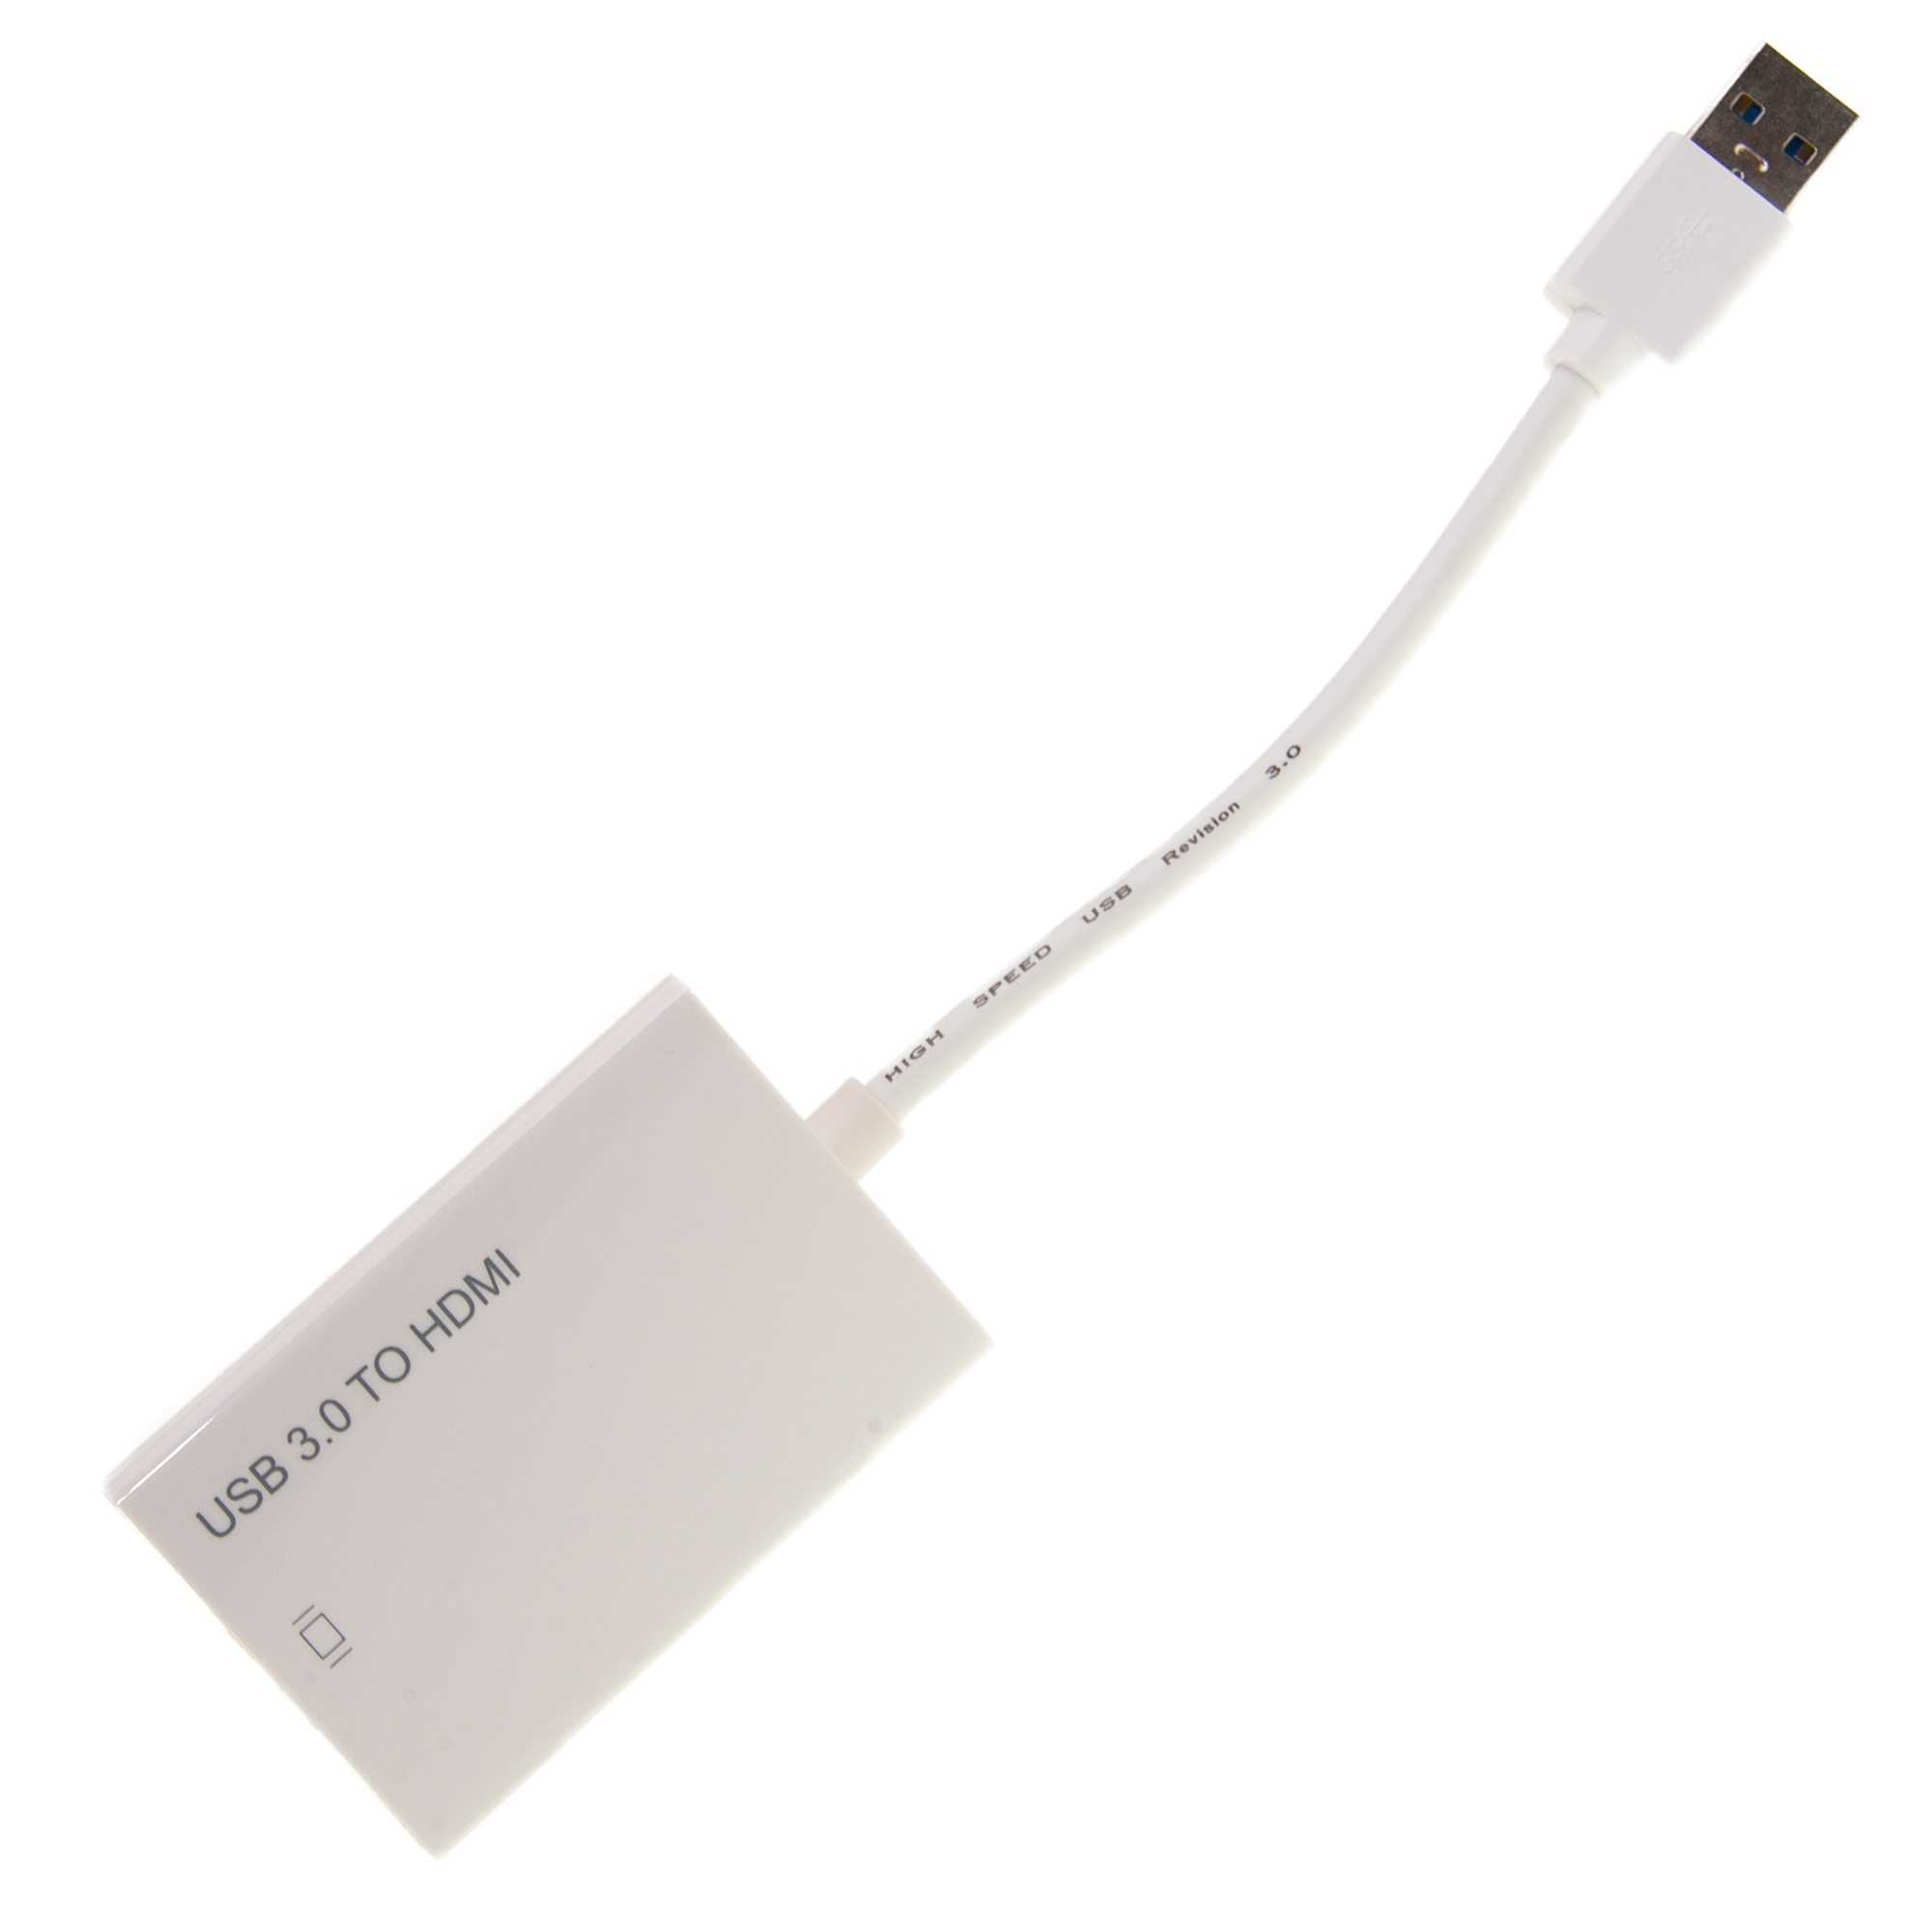 USB to HDMI Video Adapter, USB A port, Windows and Apple/Mac